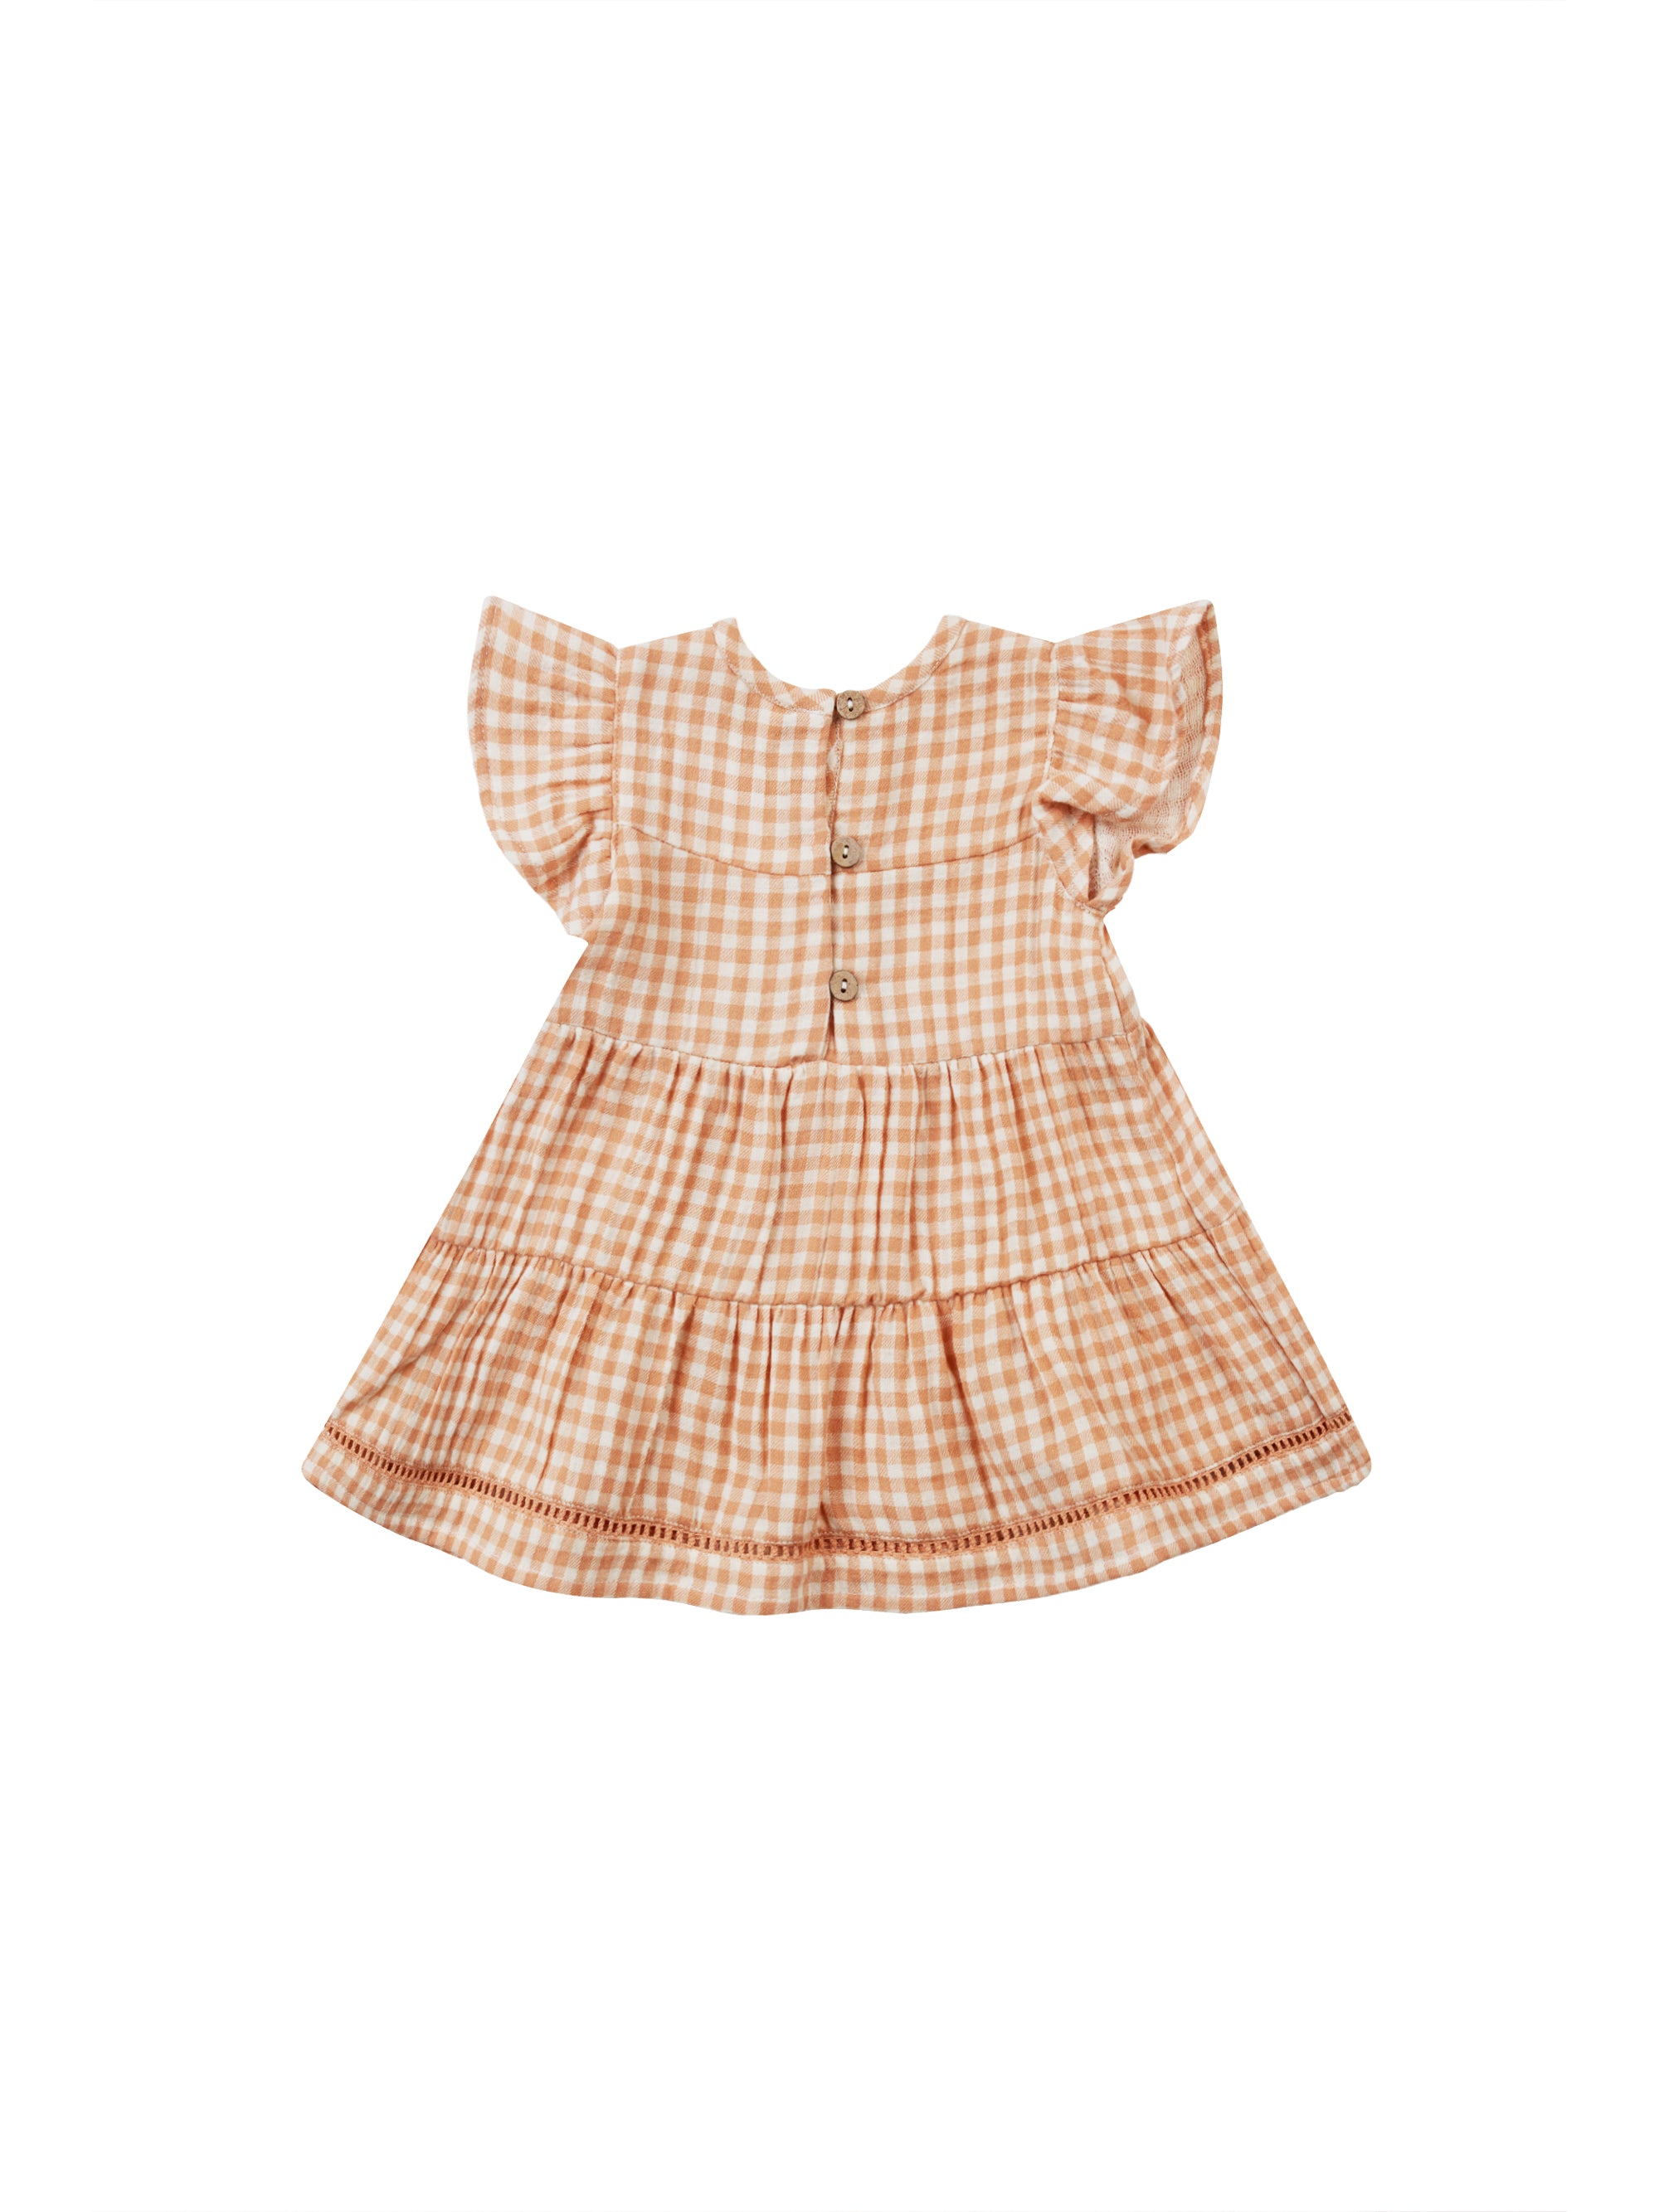 Quincy Mae Lily Dress Melon Gingham